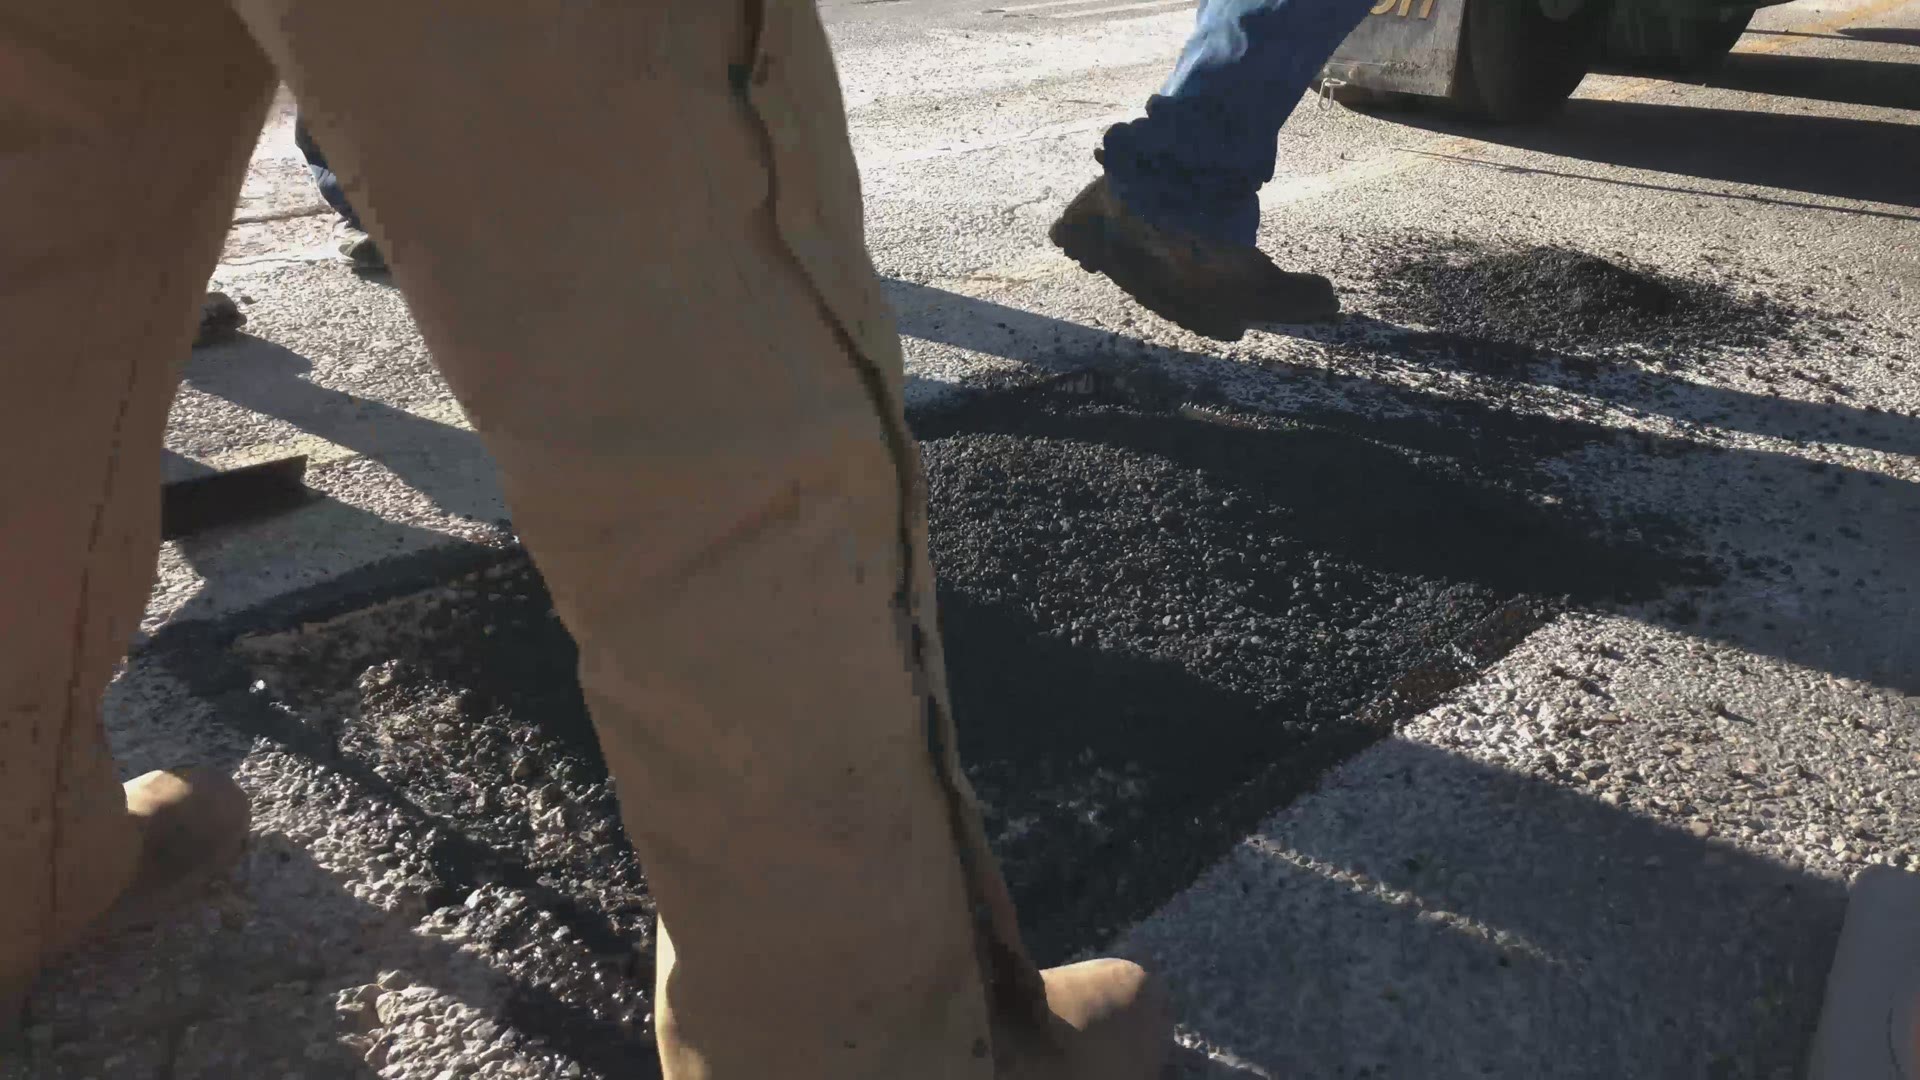 New Orleans drivers are well aware of the pothole problem in the city, making it an obvious choice for a helping hand from Domino's.